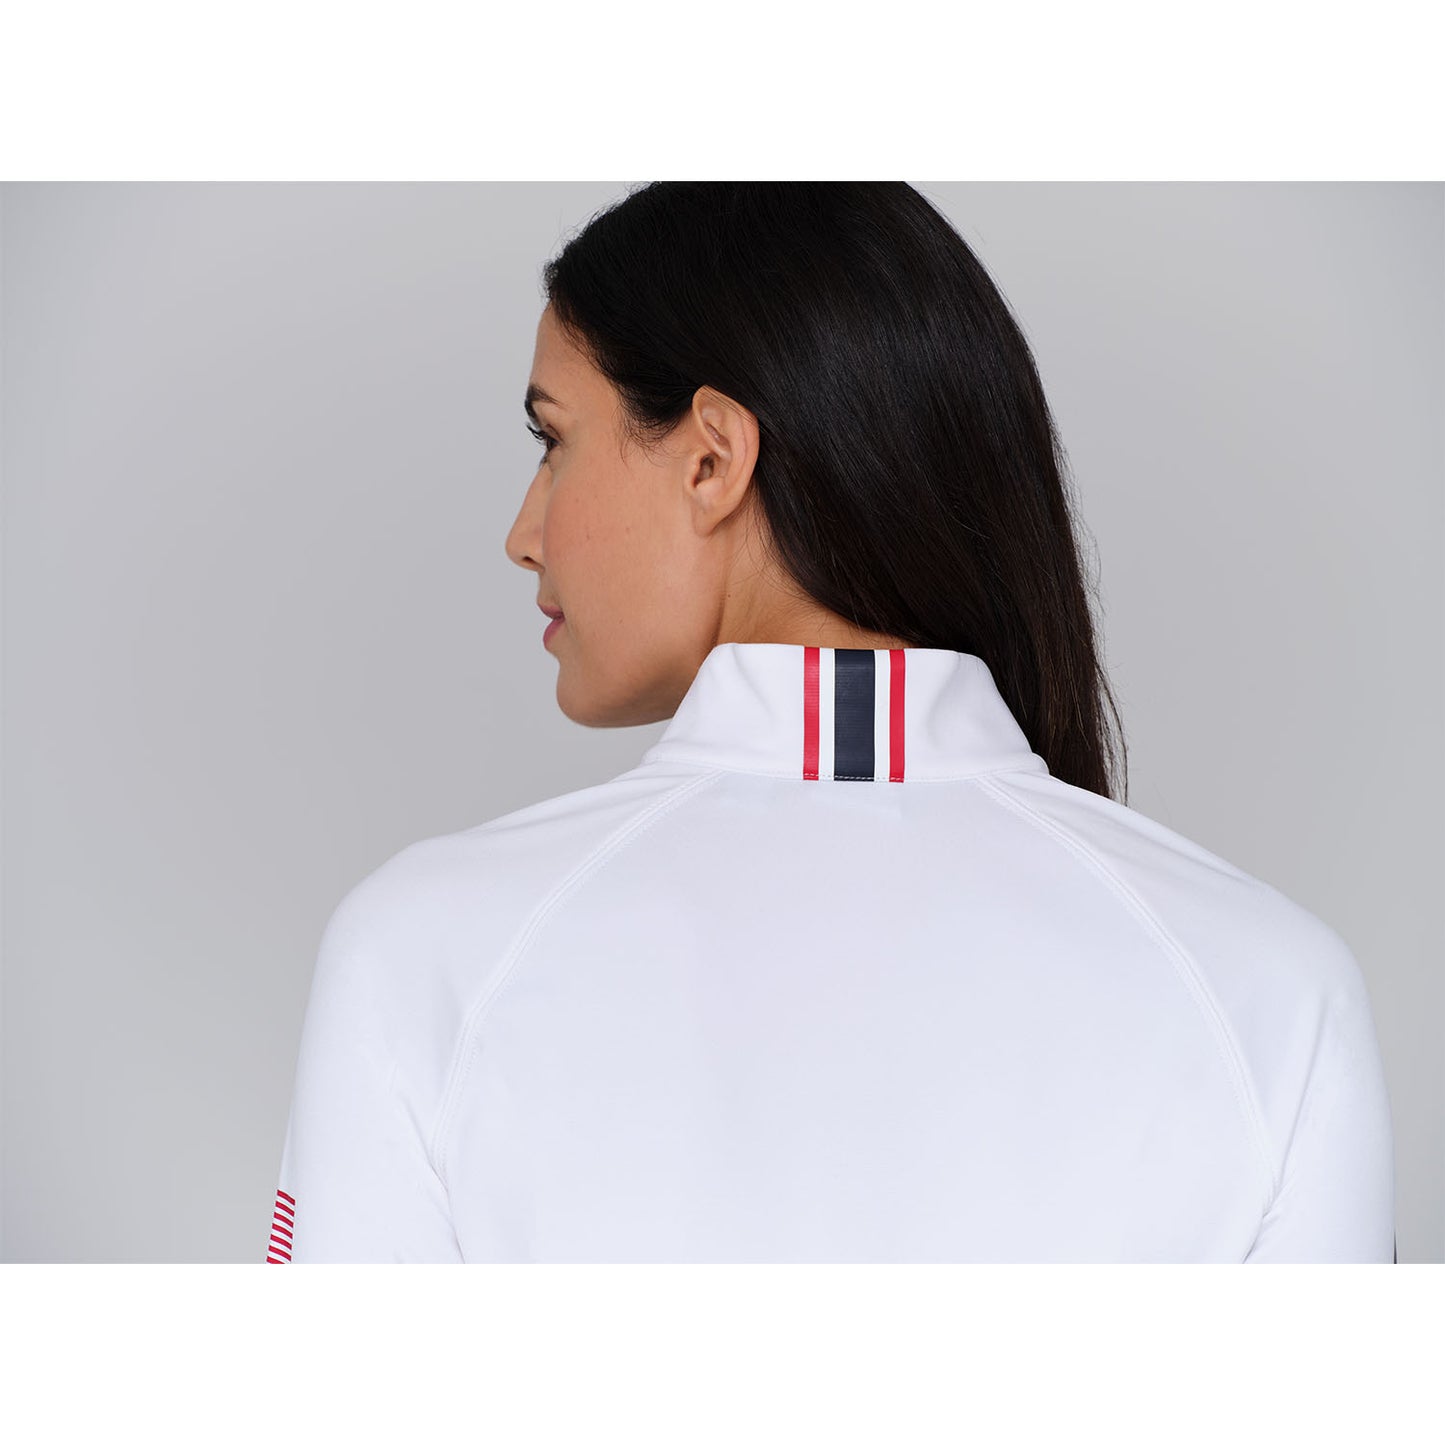 Dunning 2023 LPGA Official Solheim Cup Team Uniform Women's Player Jersey Performance Quarter Zip in White - Zoomed in Lifestyle Back Top View